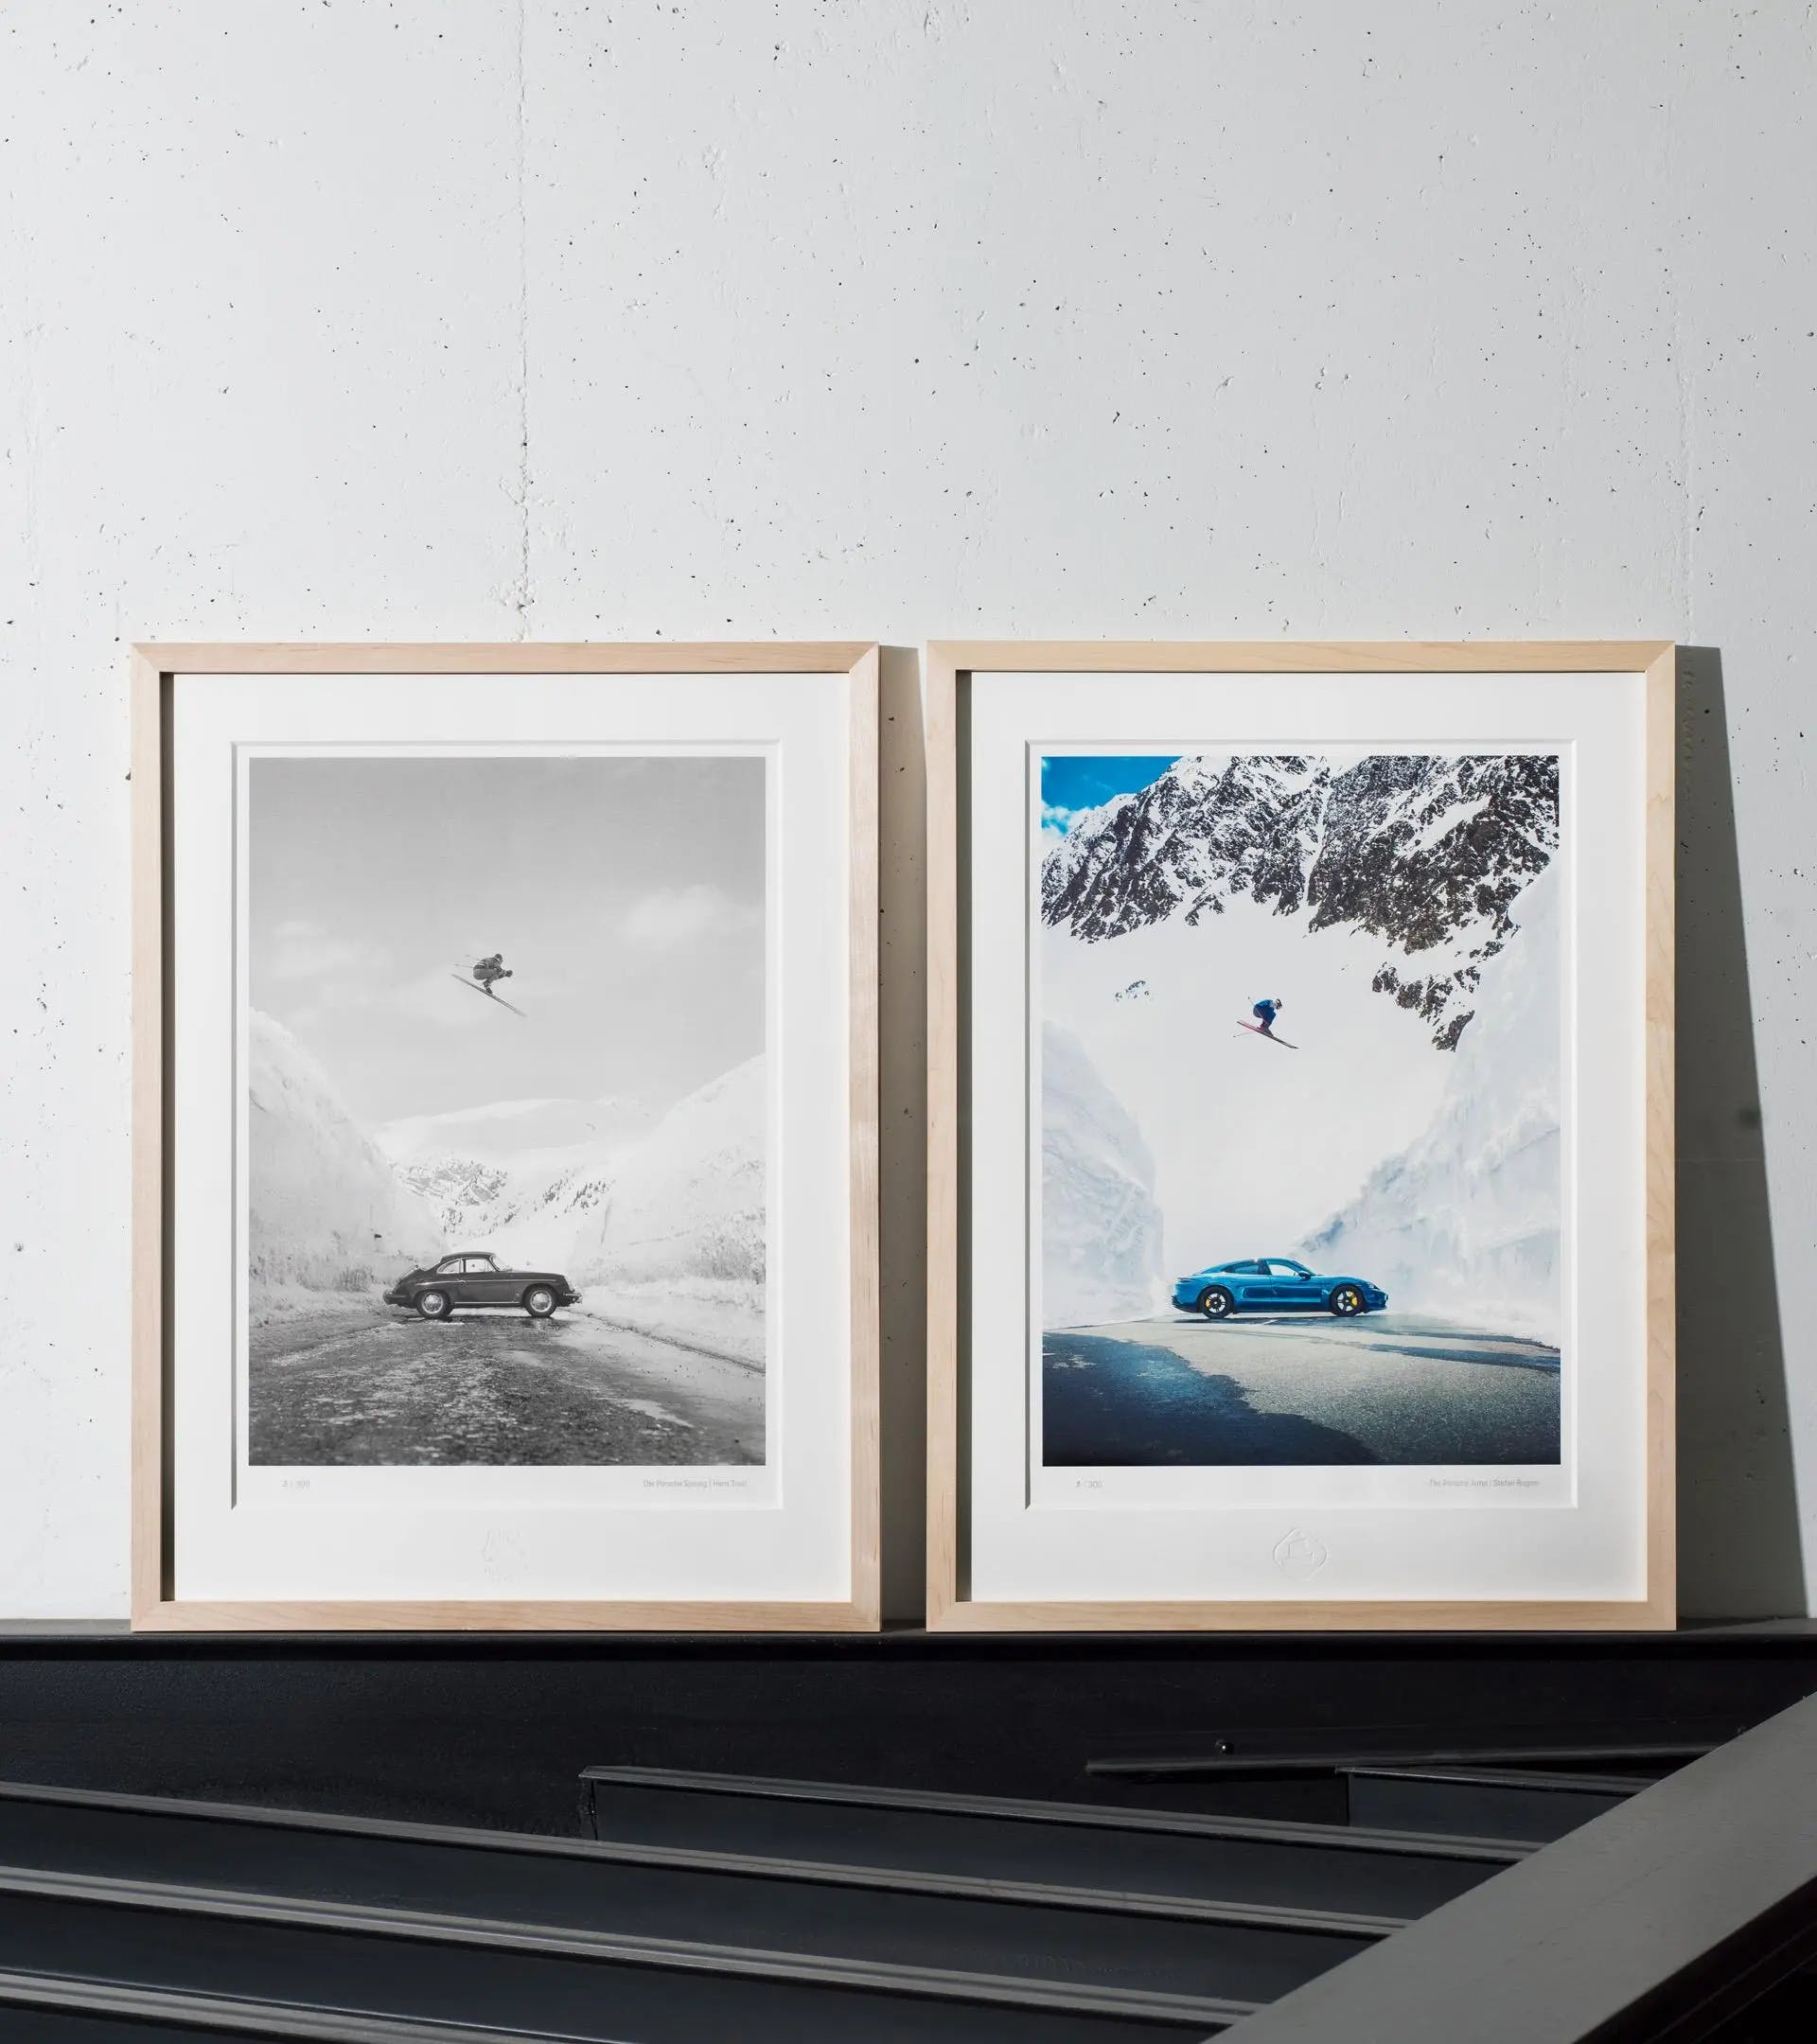 Two picture frames beside each other showing skier jumping over Porsche cars